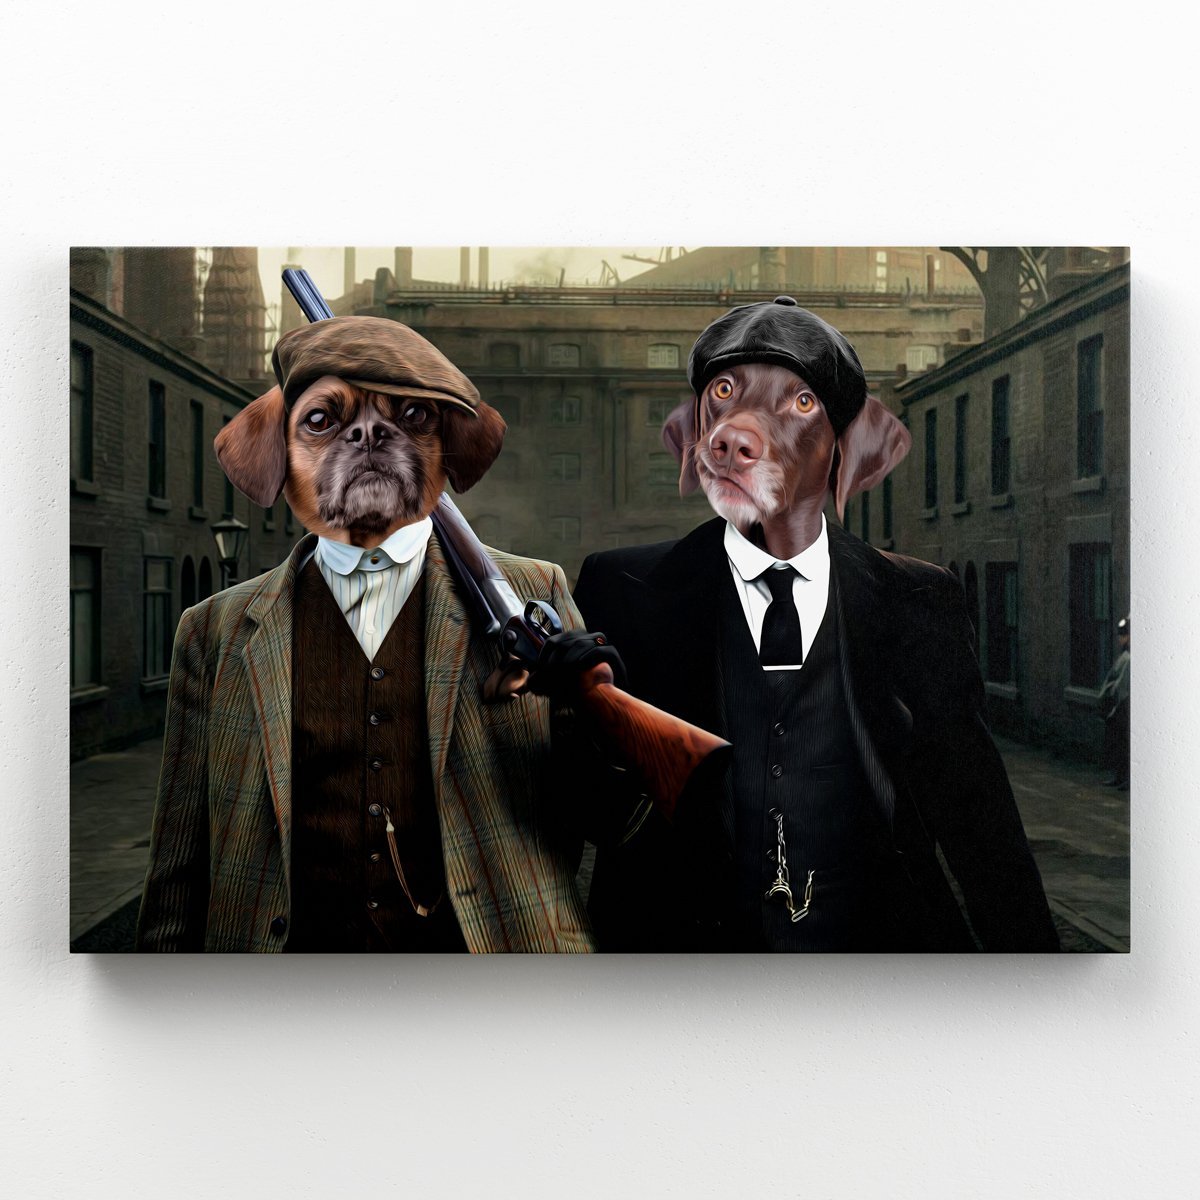 The 2 Brothers (Peaky Blinders Inspired): Custom Pet Canvas - Paw & Glory - #pet portraits# - #dog portraits# - #pet portraits uk#paw & glory, custom pet portrait canvas,pet photo to canvas, dog portraits canvas, pet canvas portrait, pet canvas print, dog photo on canvas